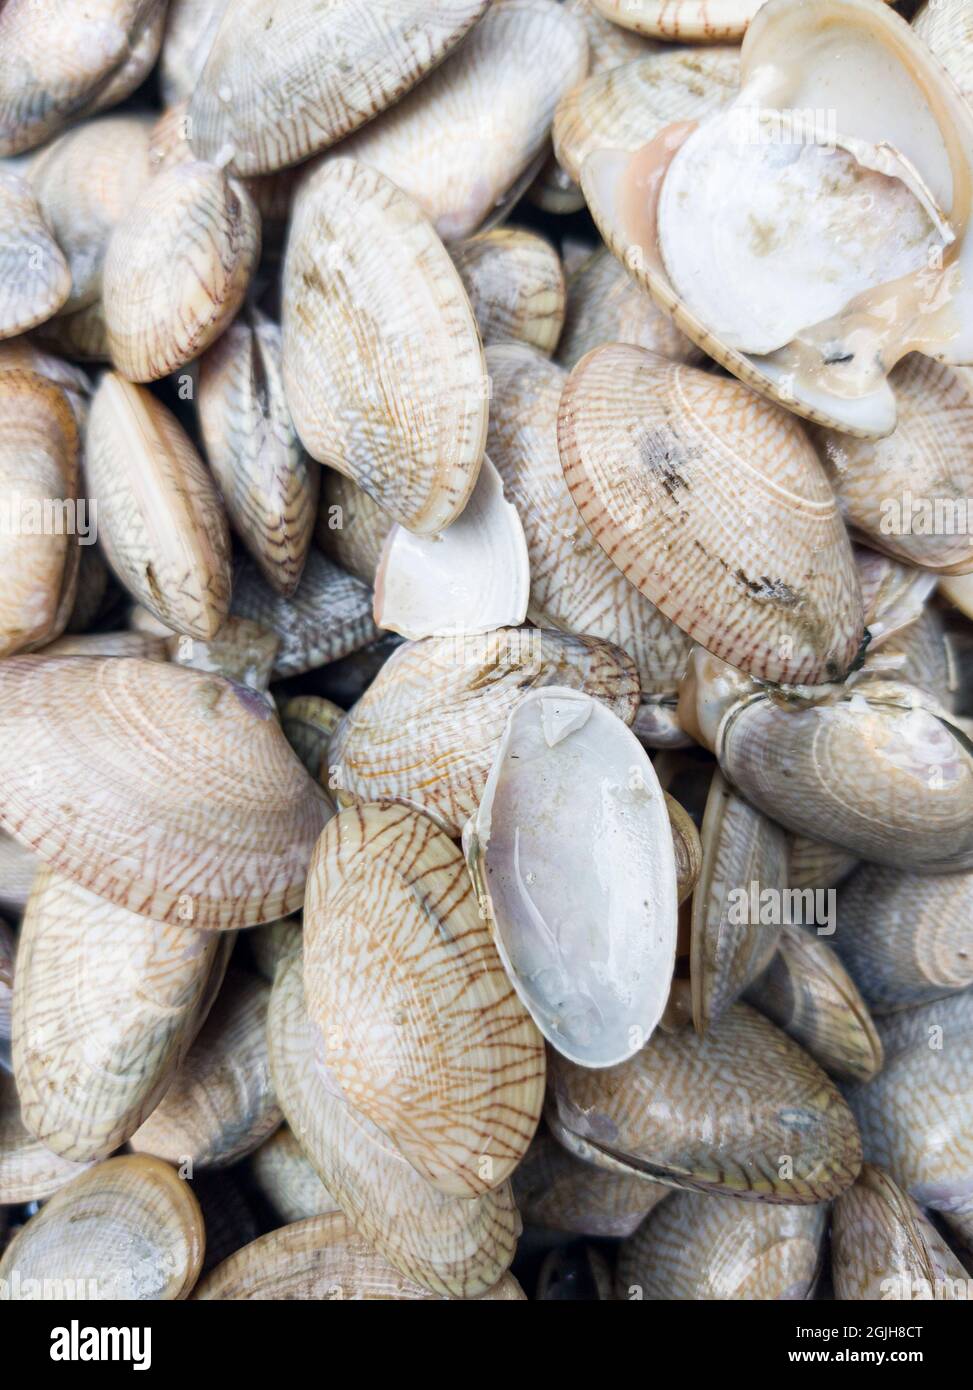 The fresh saltwater clams ready for sale at the farmers market. Saltwater clams also known as lala in Malaysia. Stock Photo